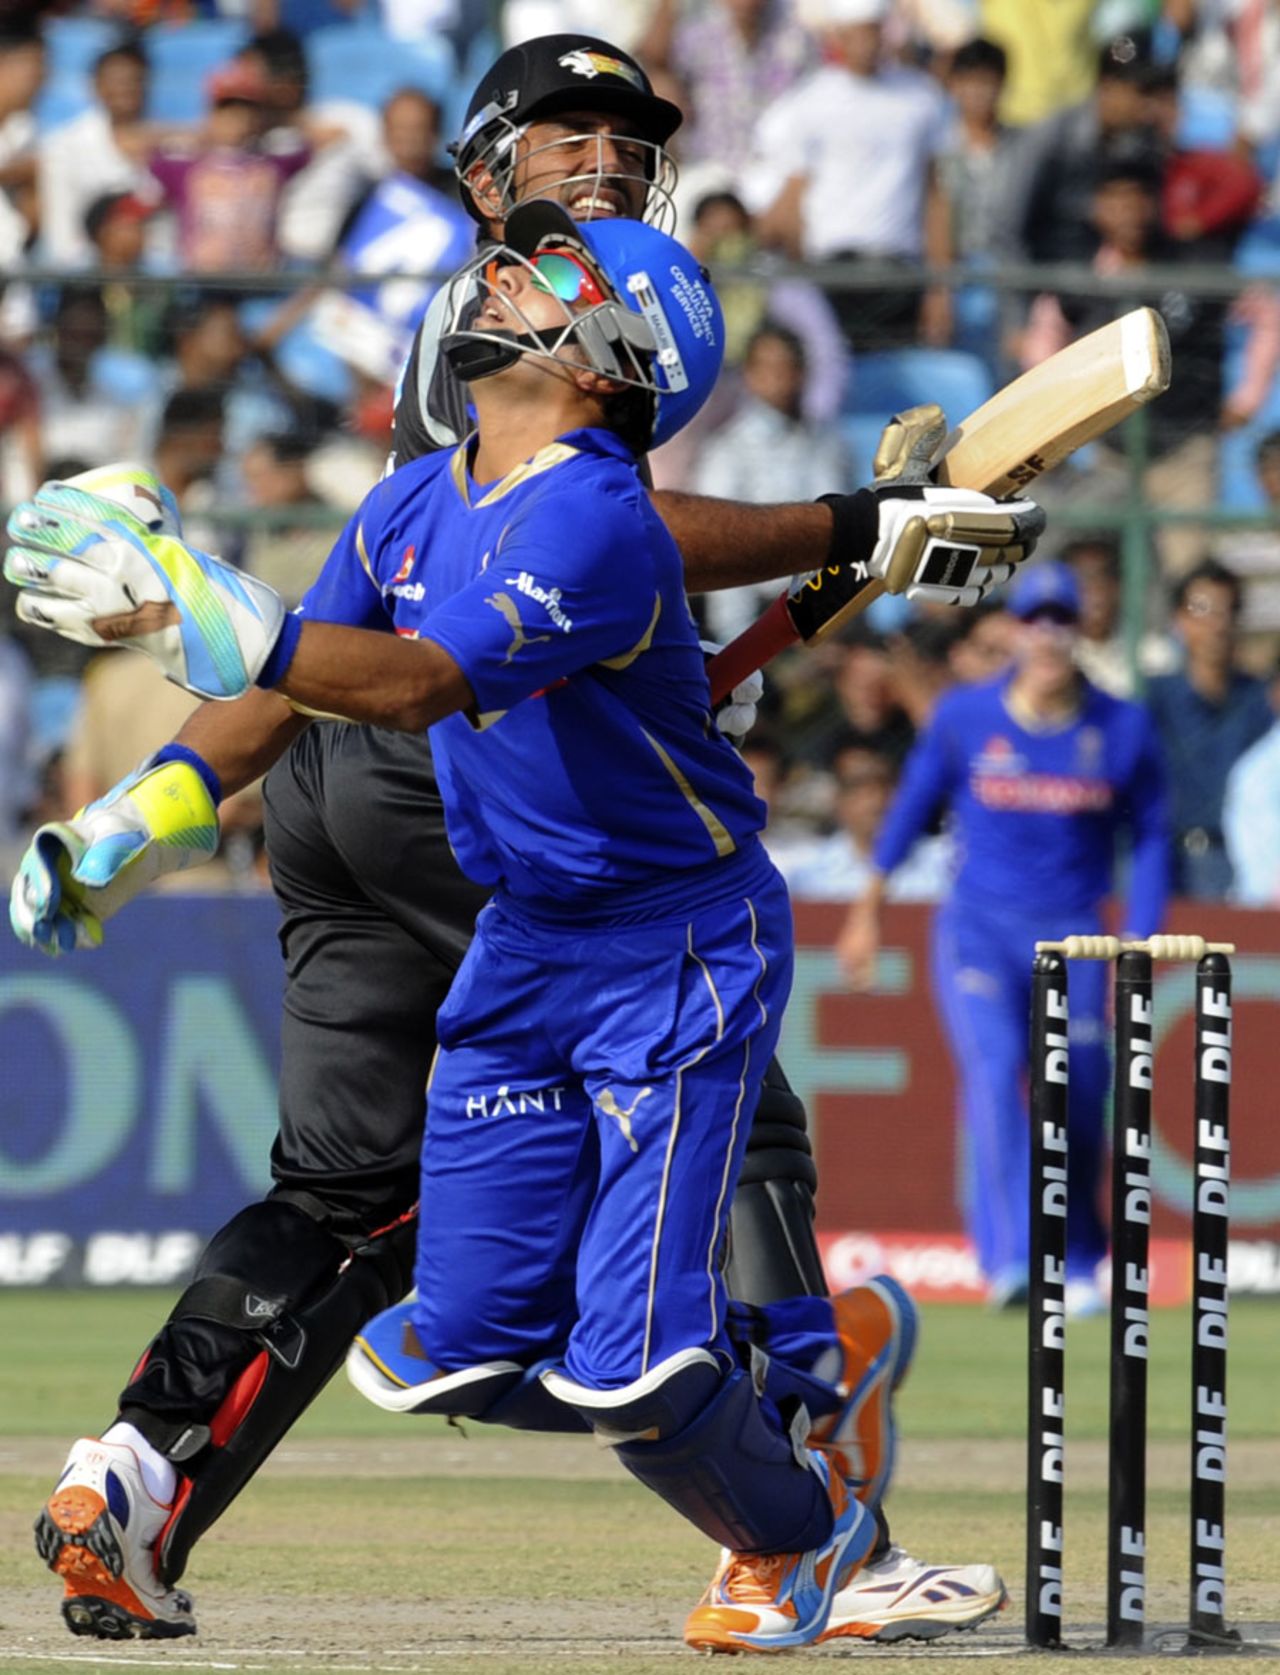 Robin Uthappa is about to be caught by Dishant Yagnik, Rajasthan Royals v Pune Warriors, IPL 2011, Jaipur, May 1, 2010